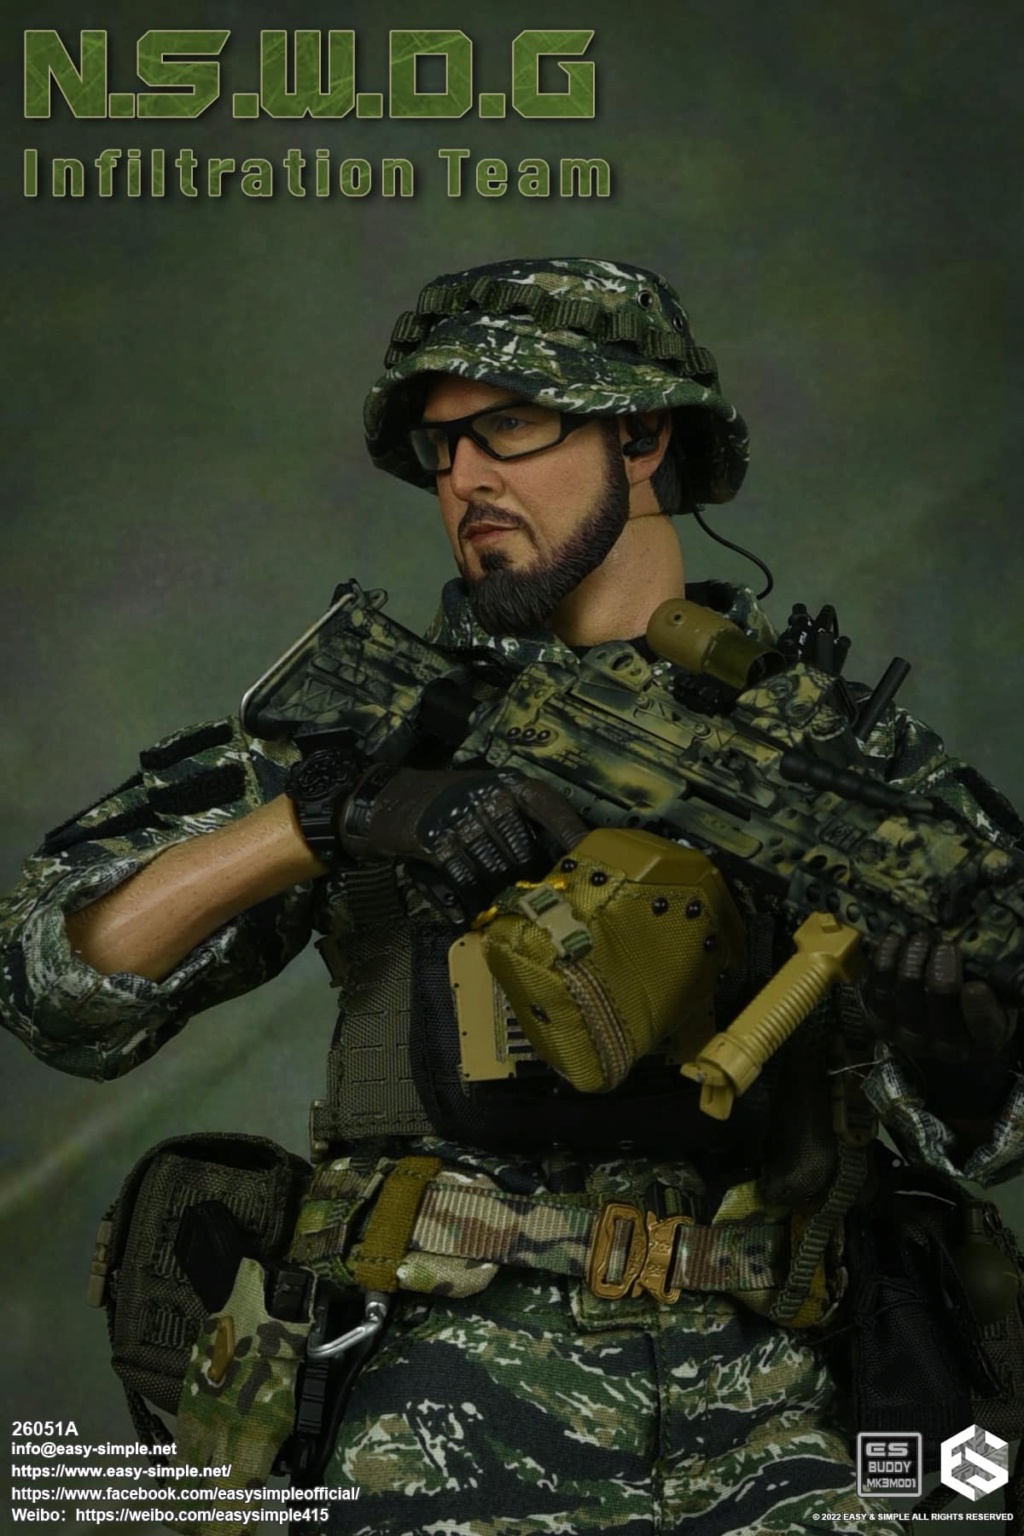 NSWDG - NEW PRODUCT: EASY AND SIMPLE 1/6 SCALE FIGURE: N.S.W.D.G INFILTRATION TEAM - (2 Versions) 11854